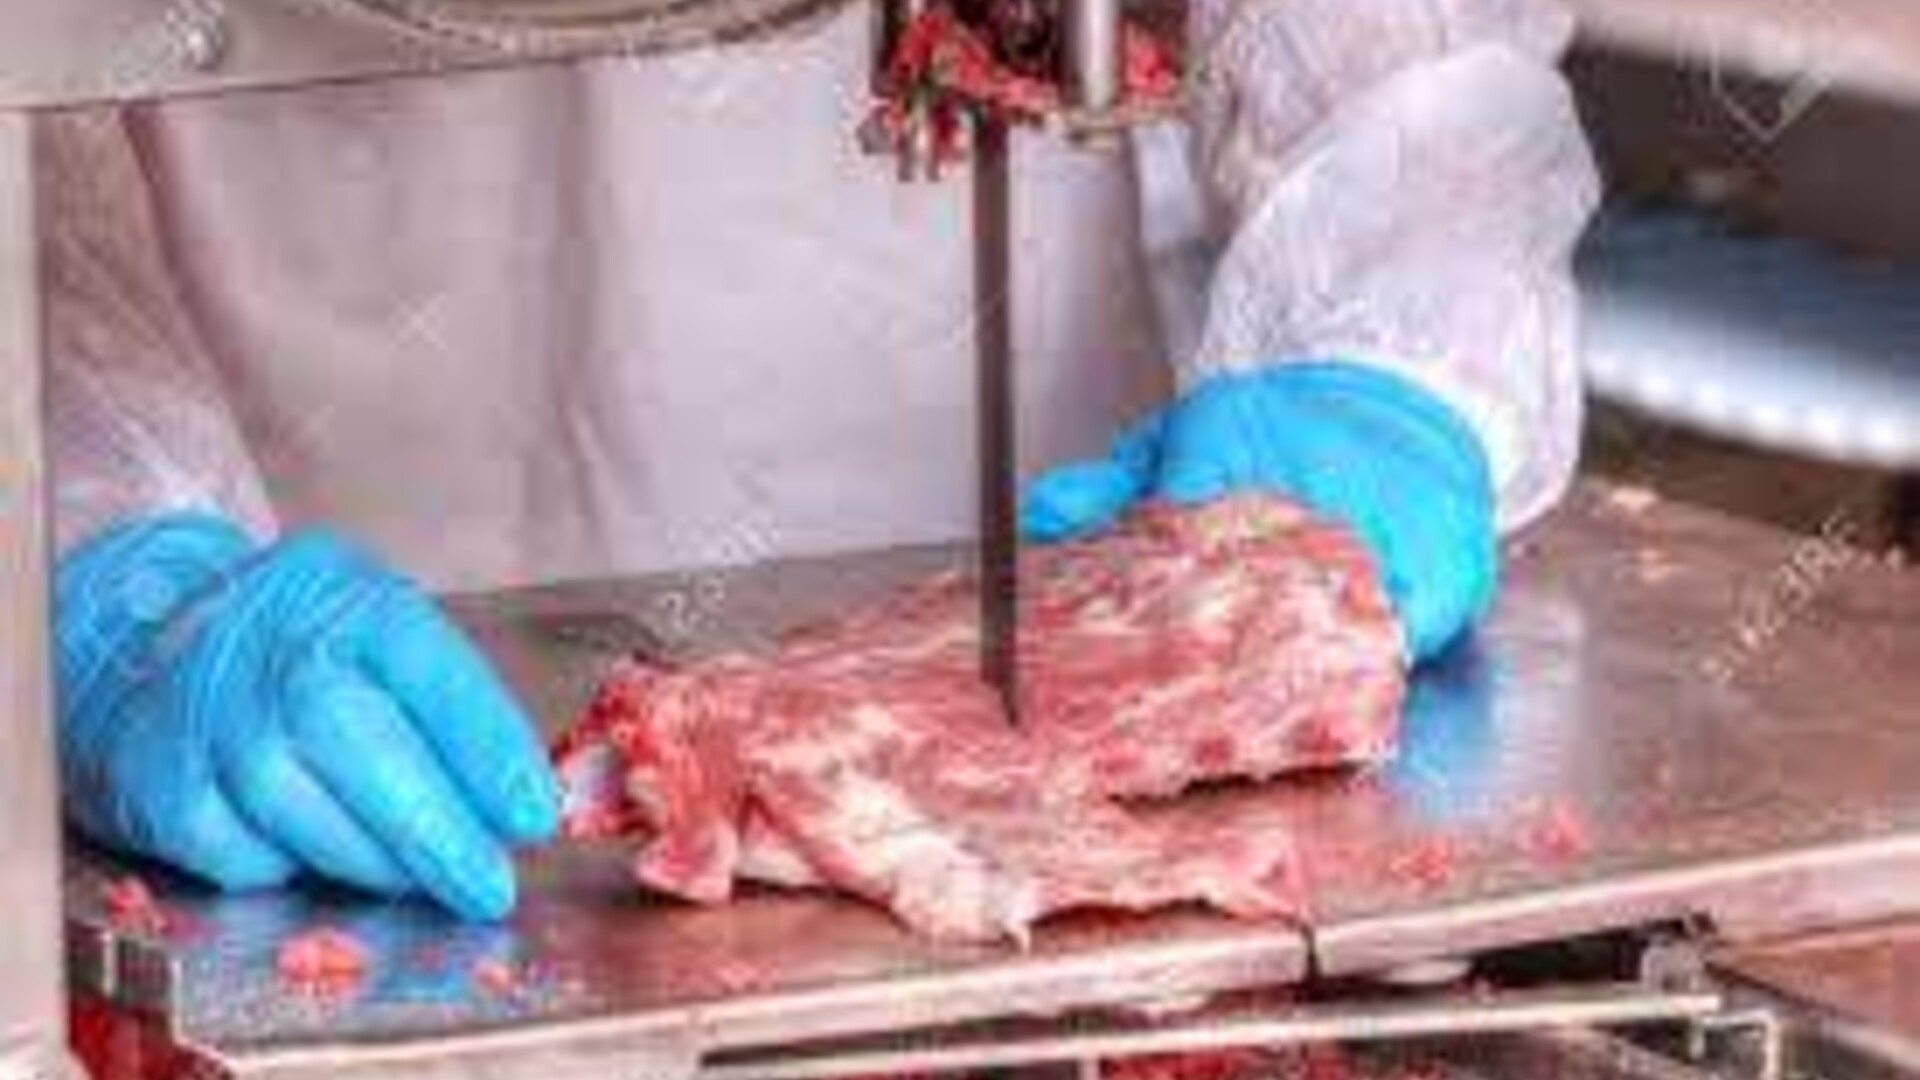 White House Reports on Meat Packing Consolidation